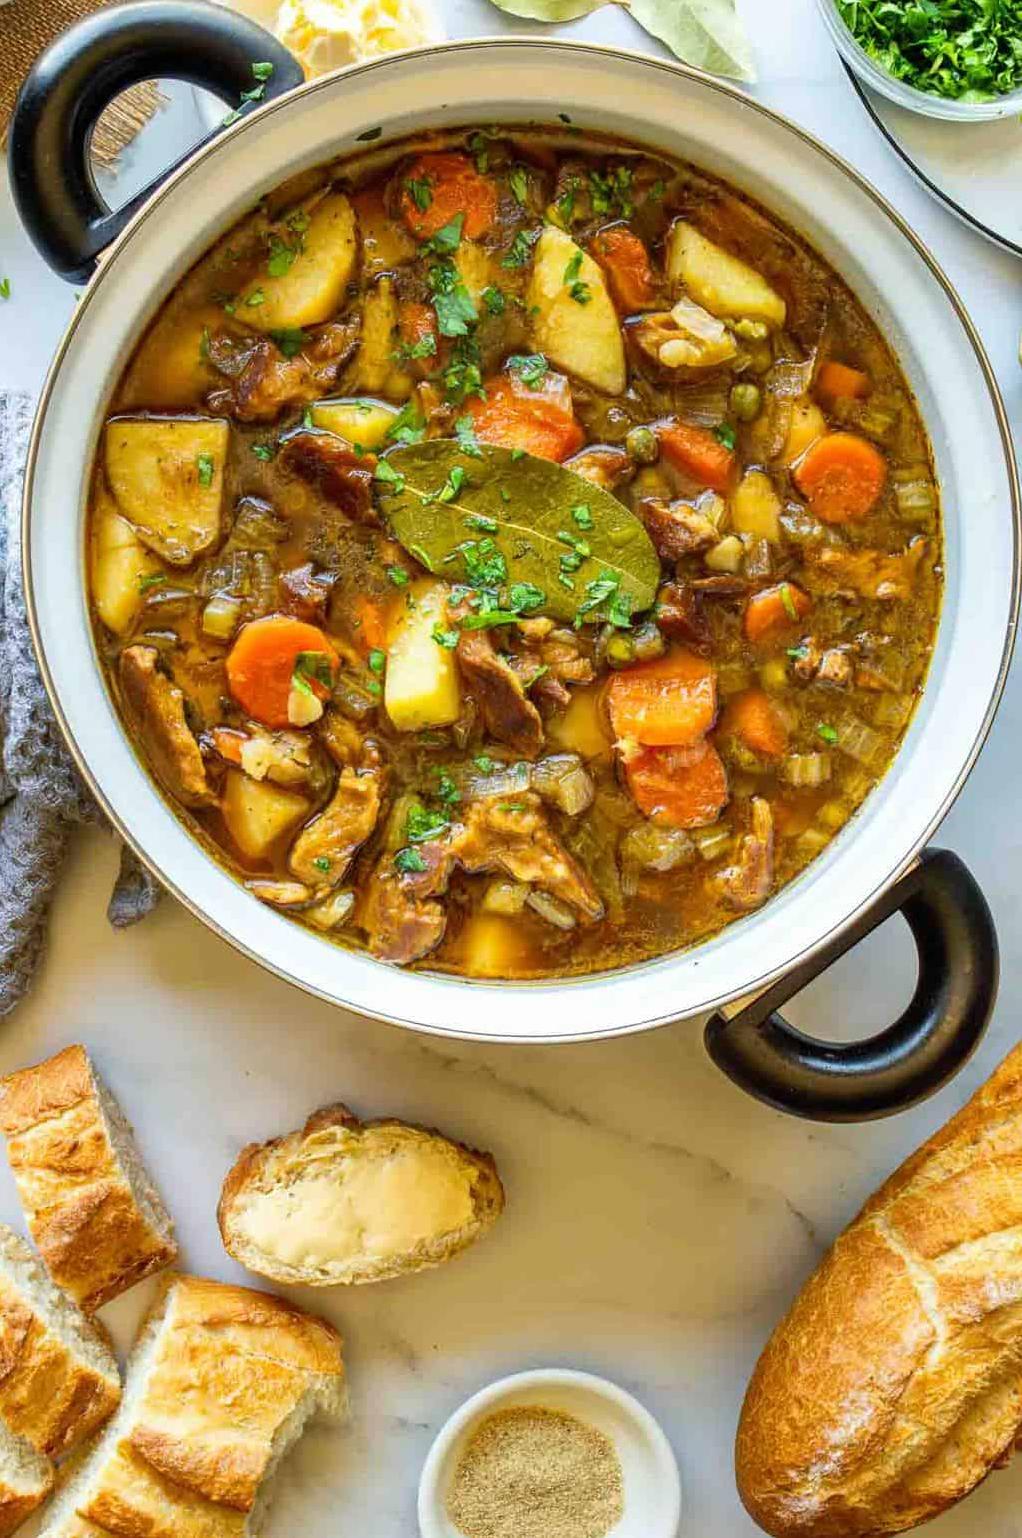  Parsley and thyme make this vegan Irish stew full of flavor and very aromatic!